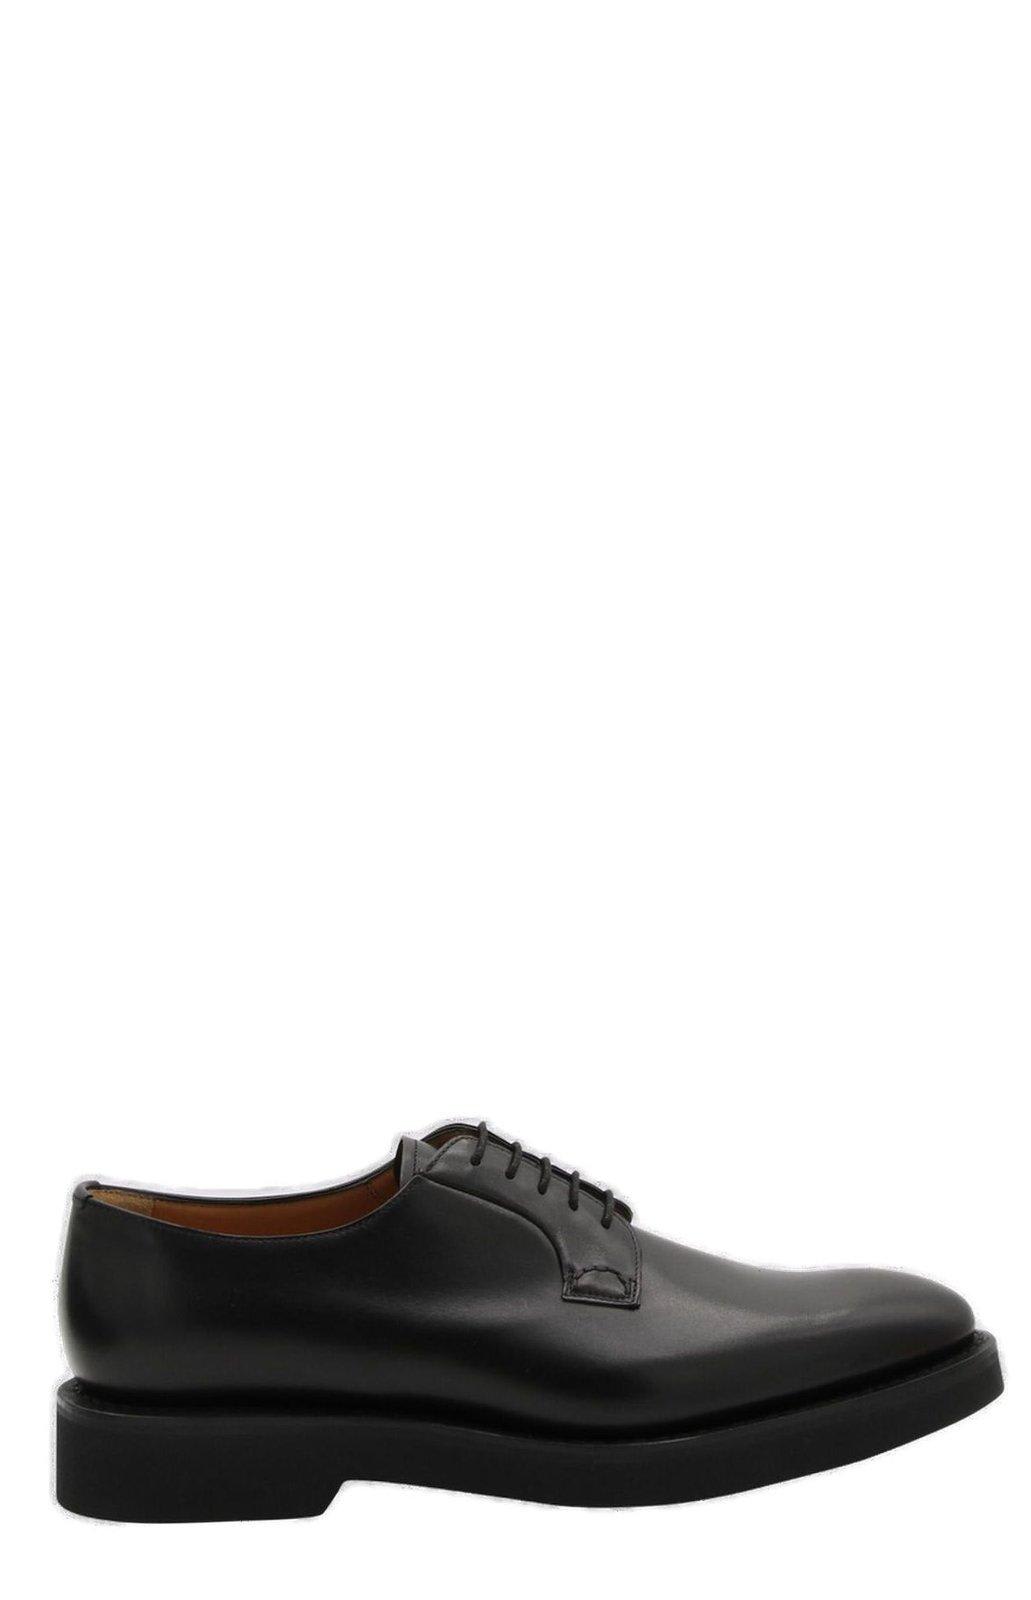 CHURCH'S ALMOND TOE LACE-UP DERBY SHOES